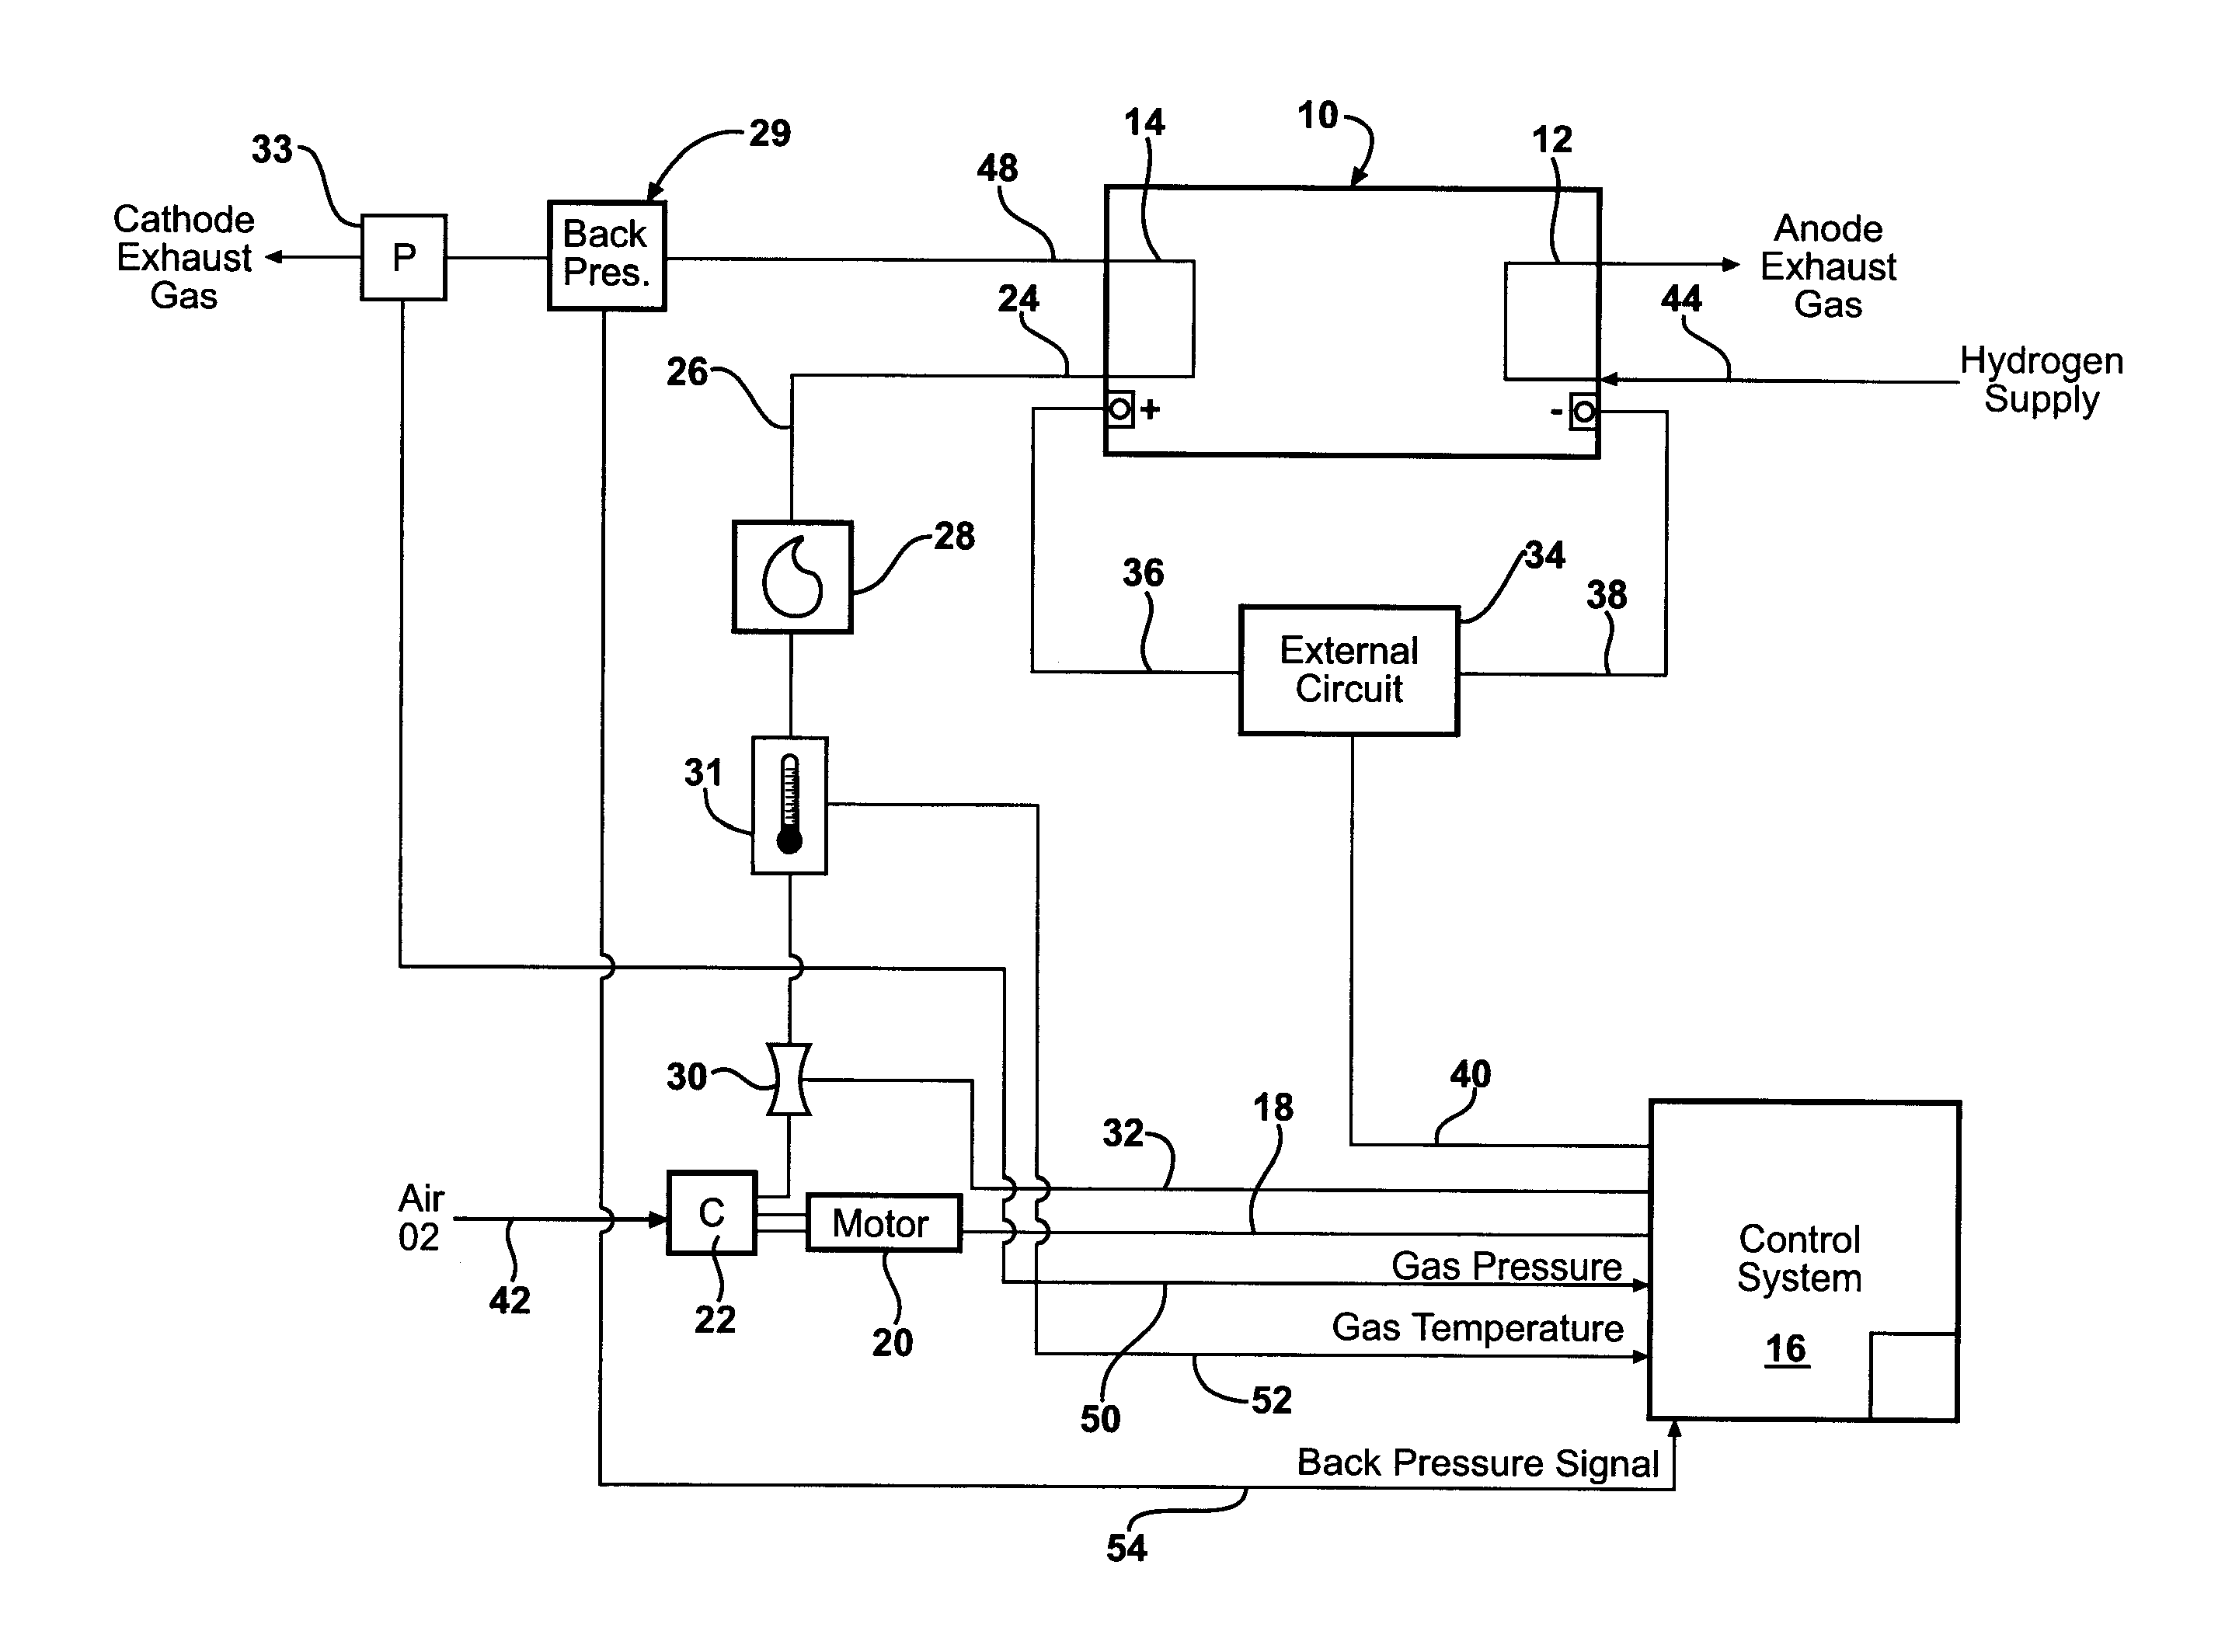 Method for managing fuel cell power increases using air flow feedback delay